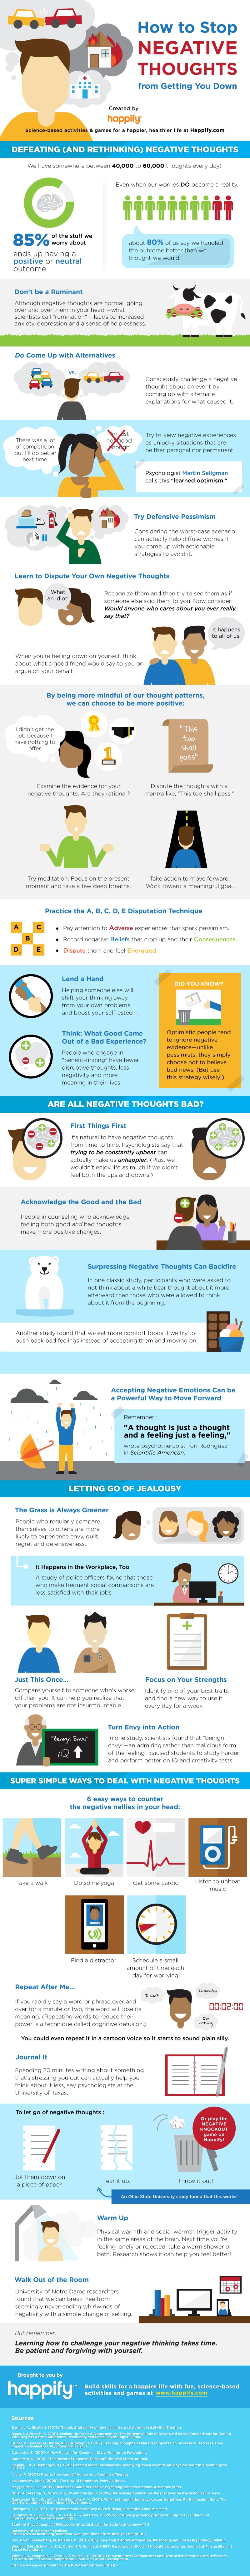 Life Coaching Negative Thoughts Infographic